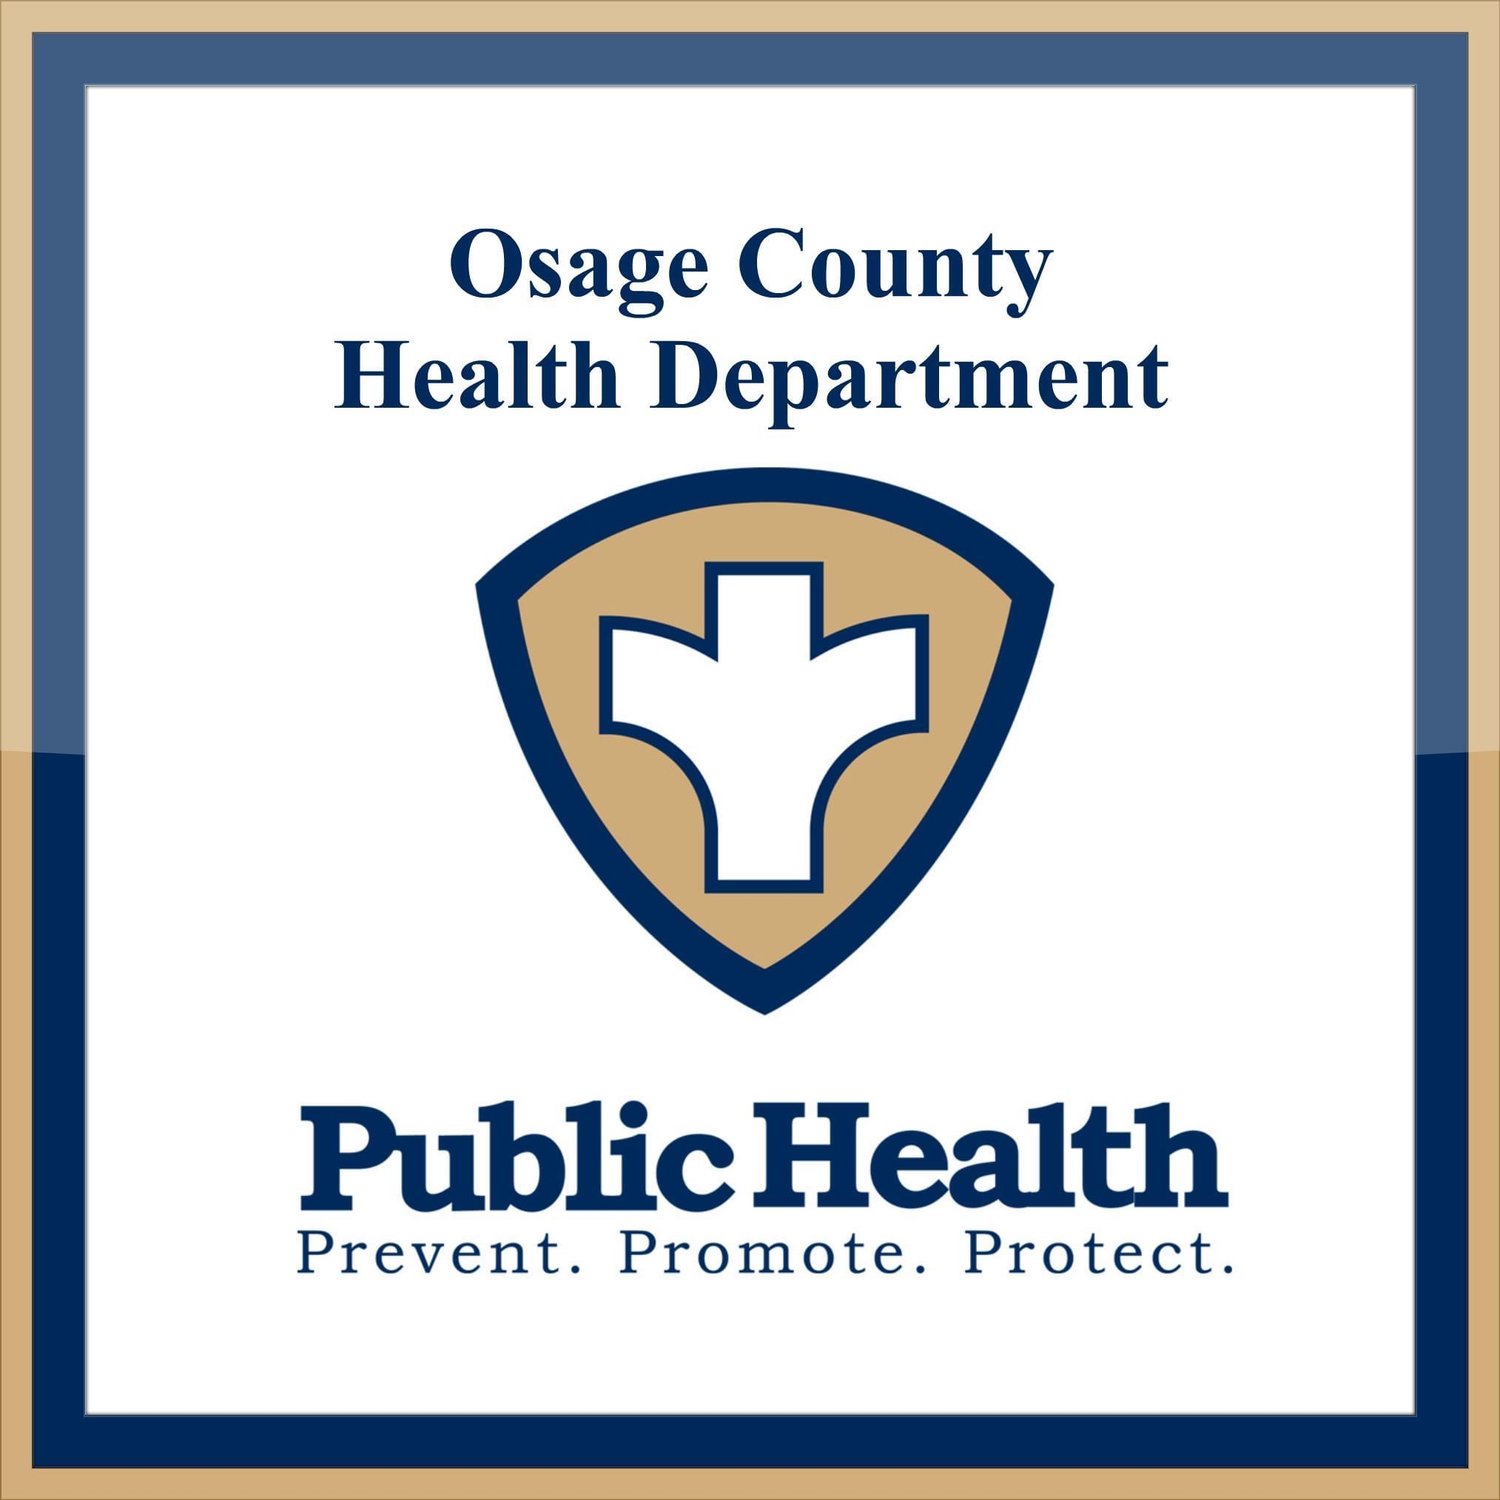 Osage County Health Department